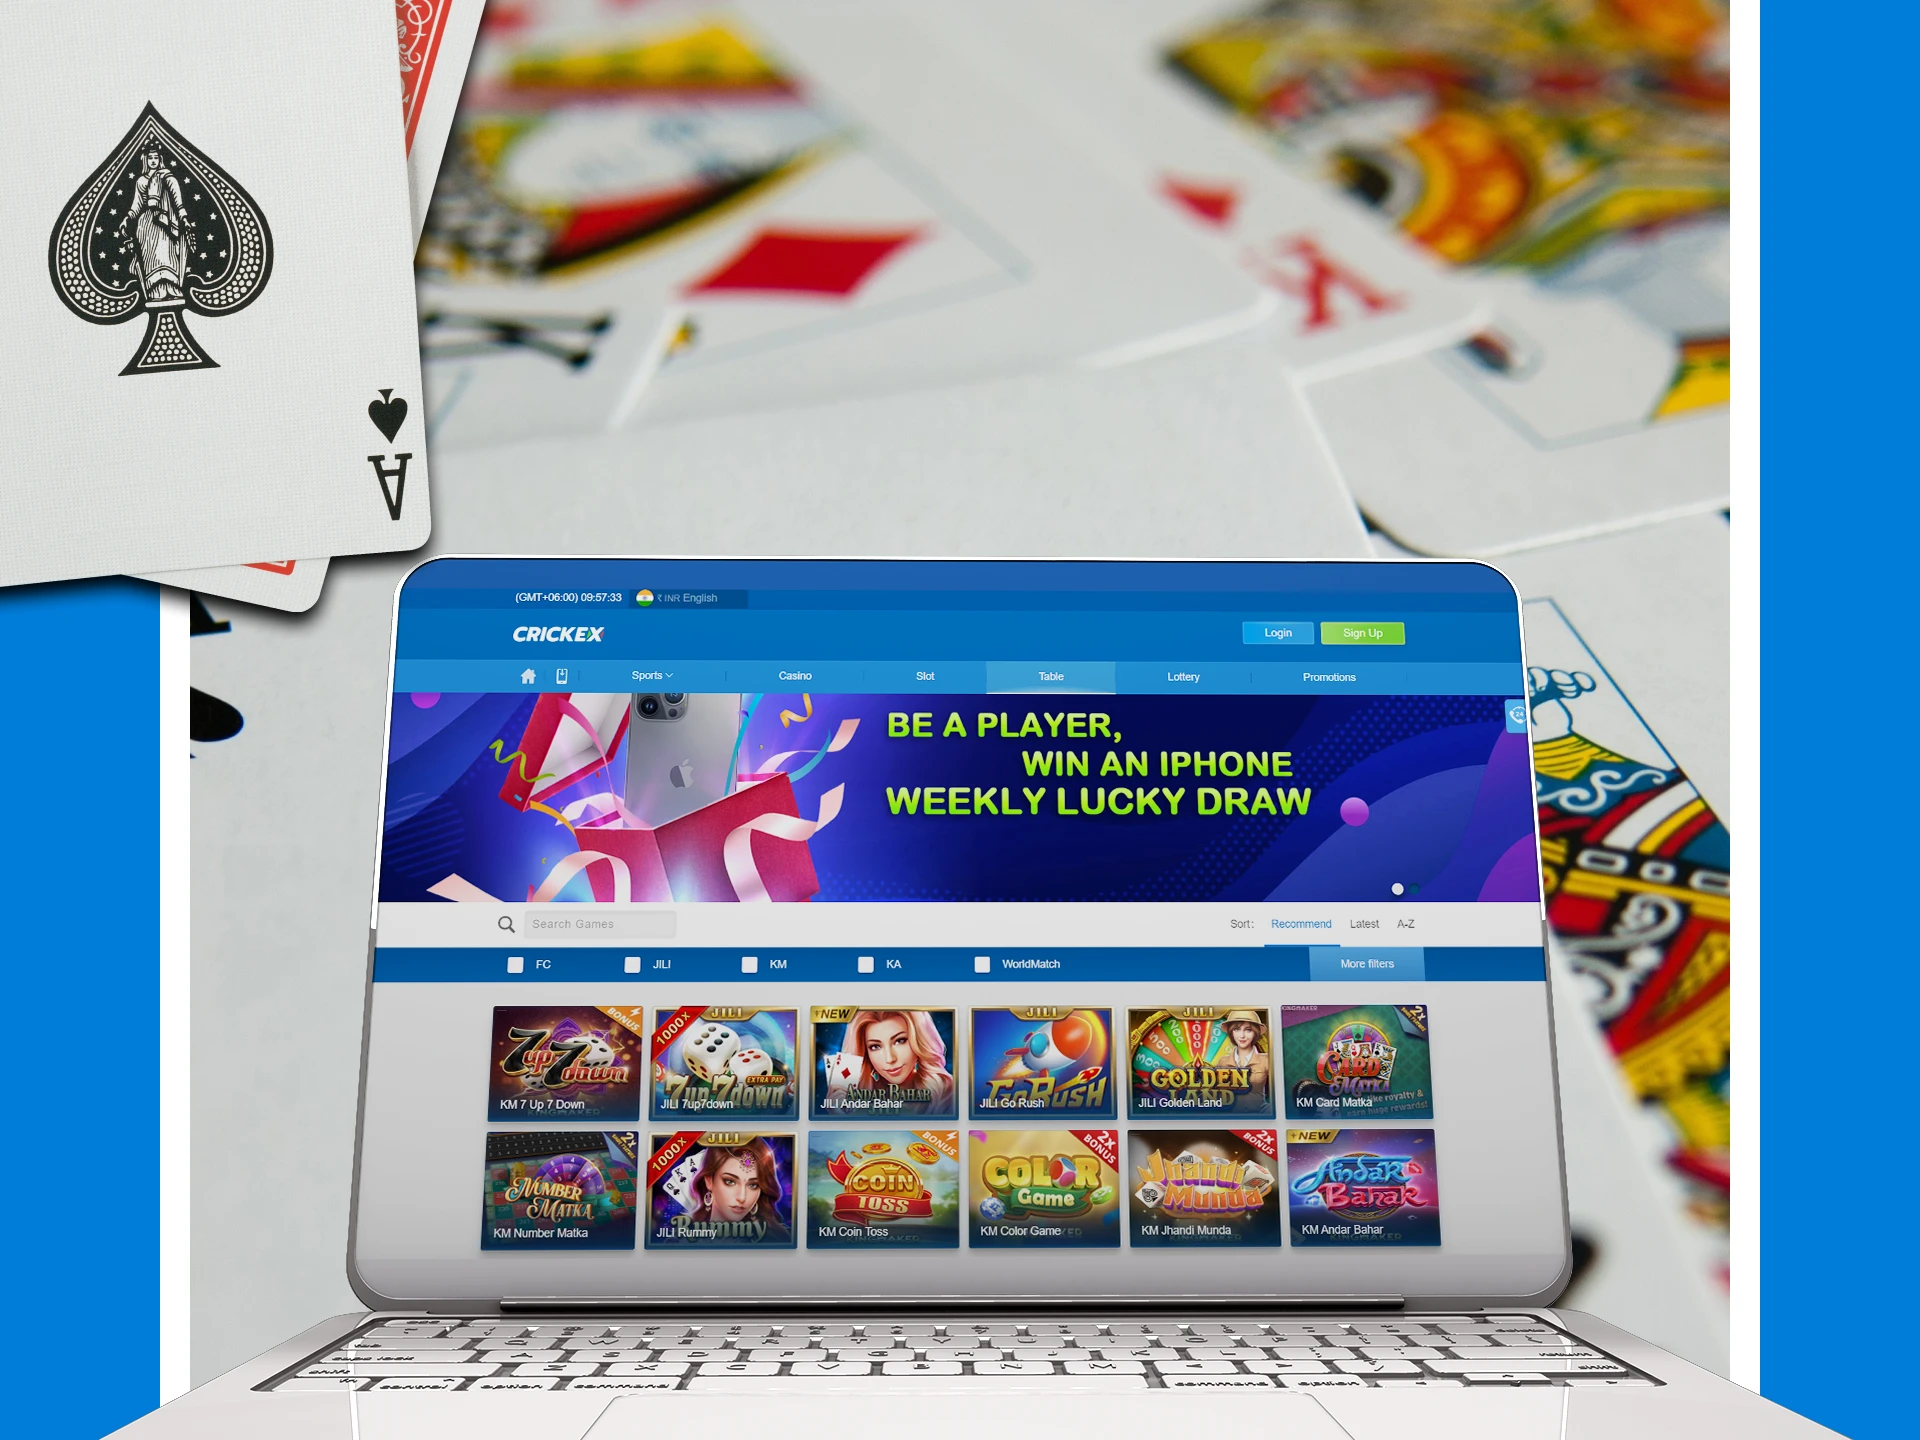 Go to the desired Crickex section for Live Casino games.